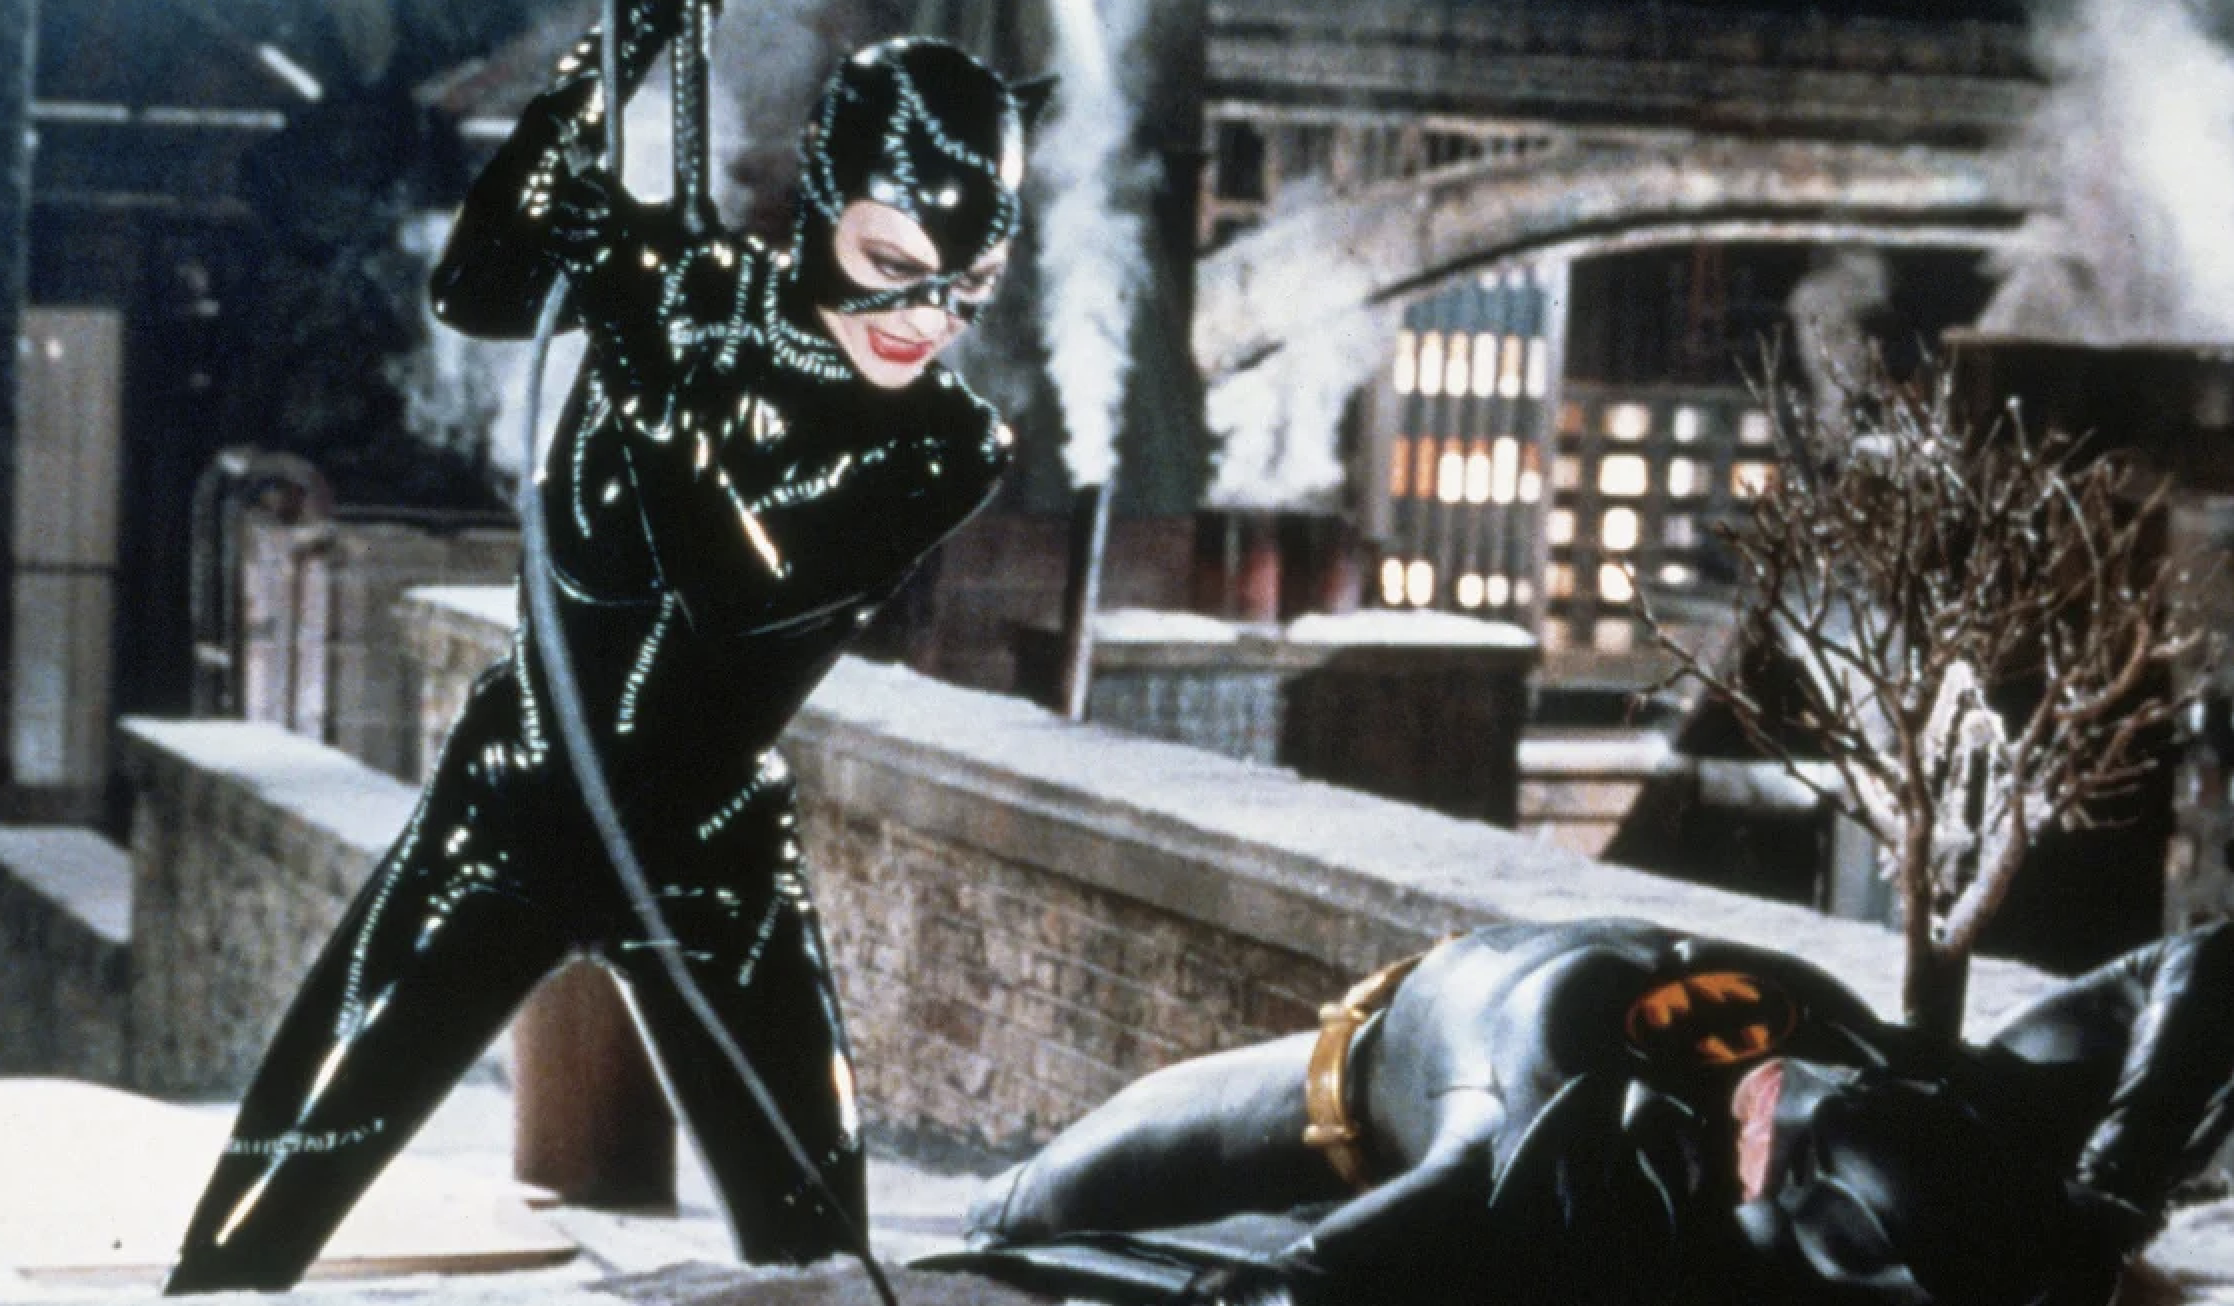 Catwoman poised above downed Batman, both in costumes, portrayed as movie characters